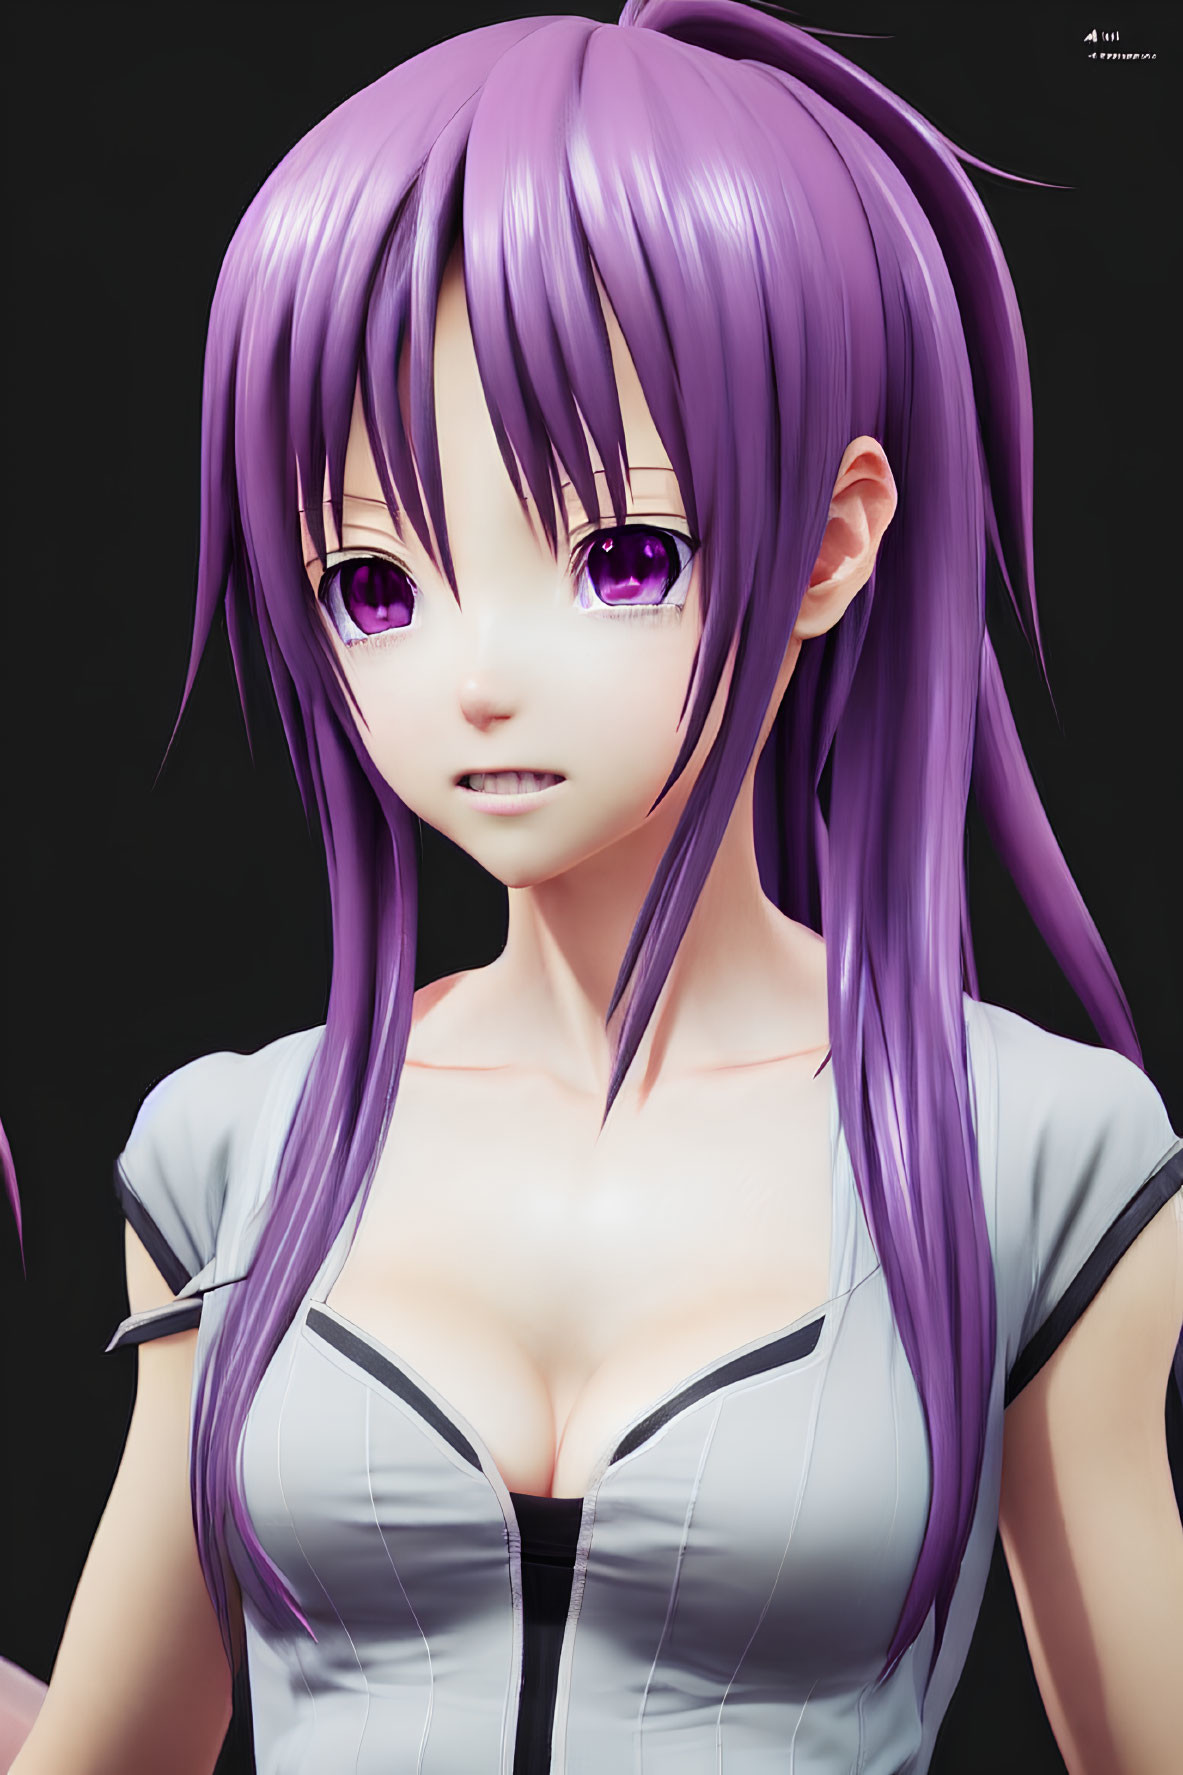 Female anime character with long purple hair, purple eyes, gray top.